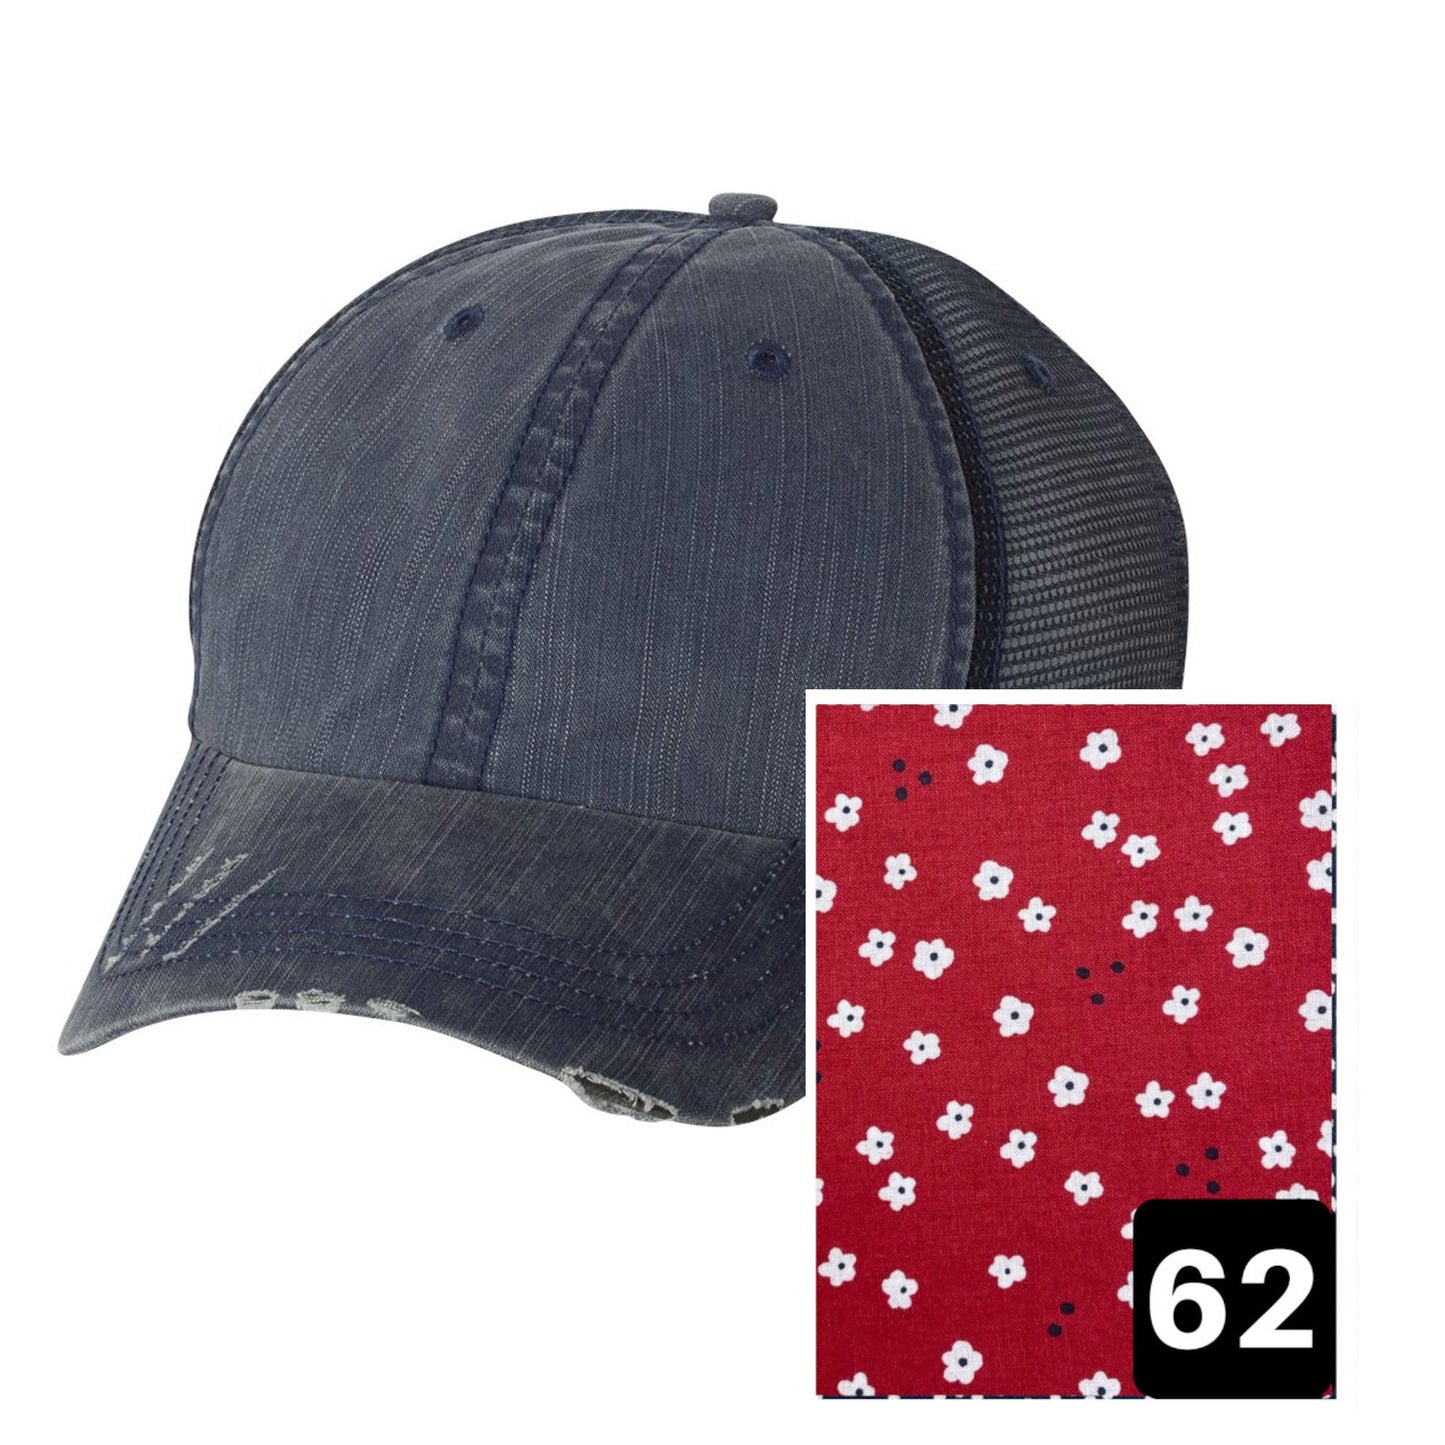 Tennessee Hat | Navy Distressed Trucker Cap | Many Fabric Choices